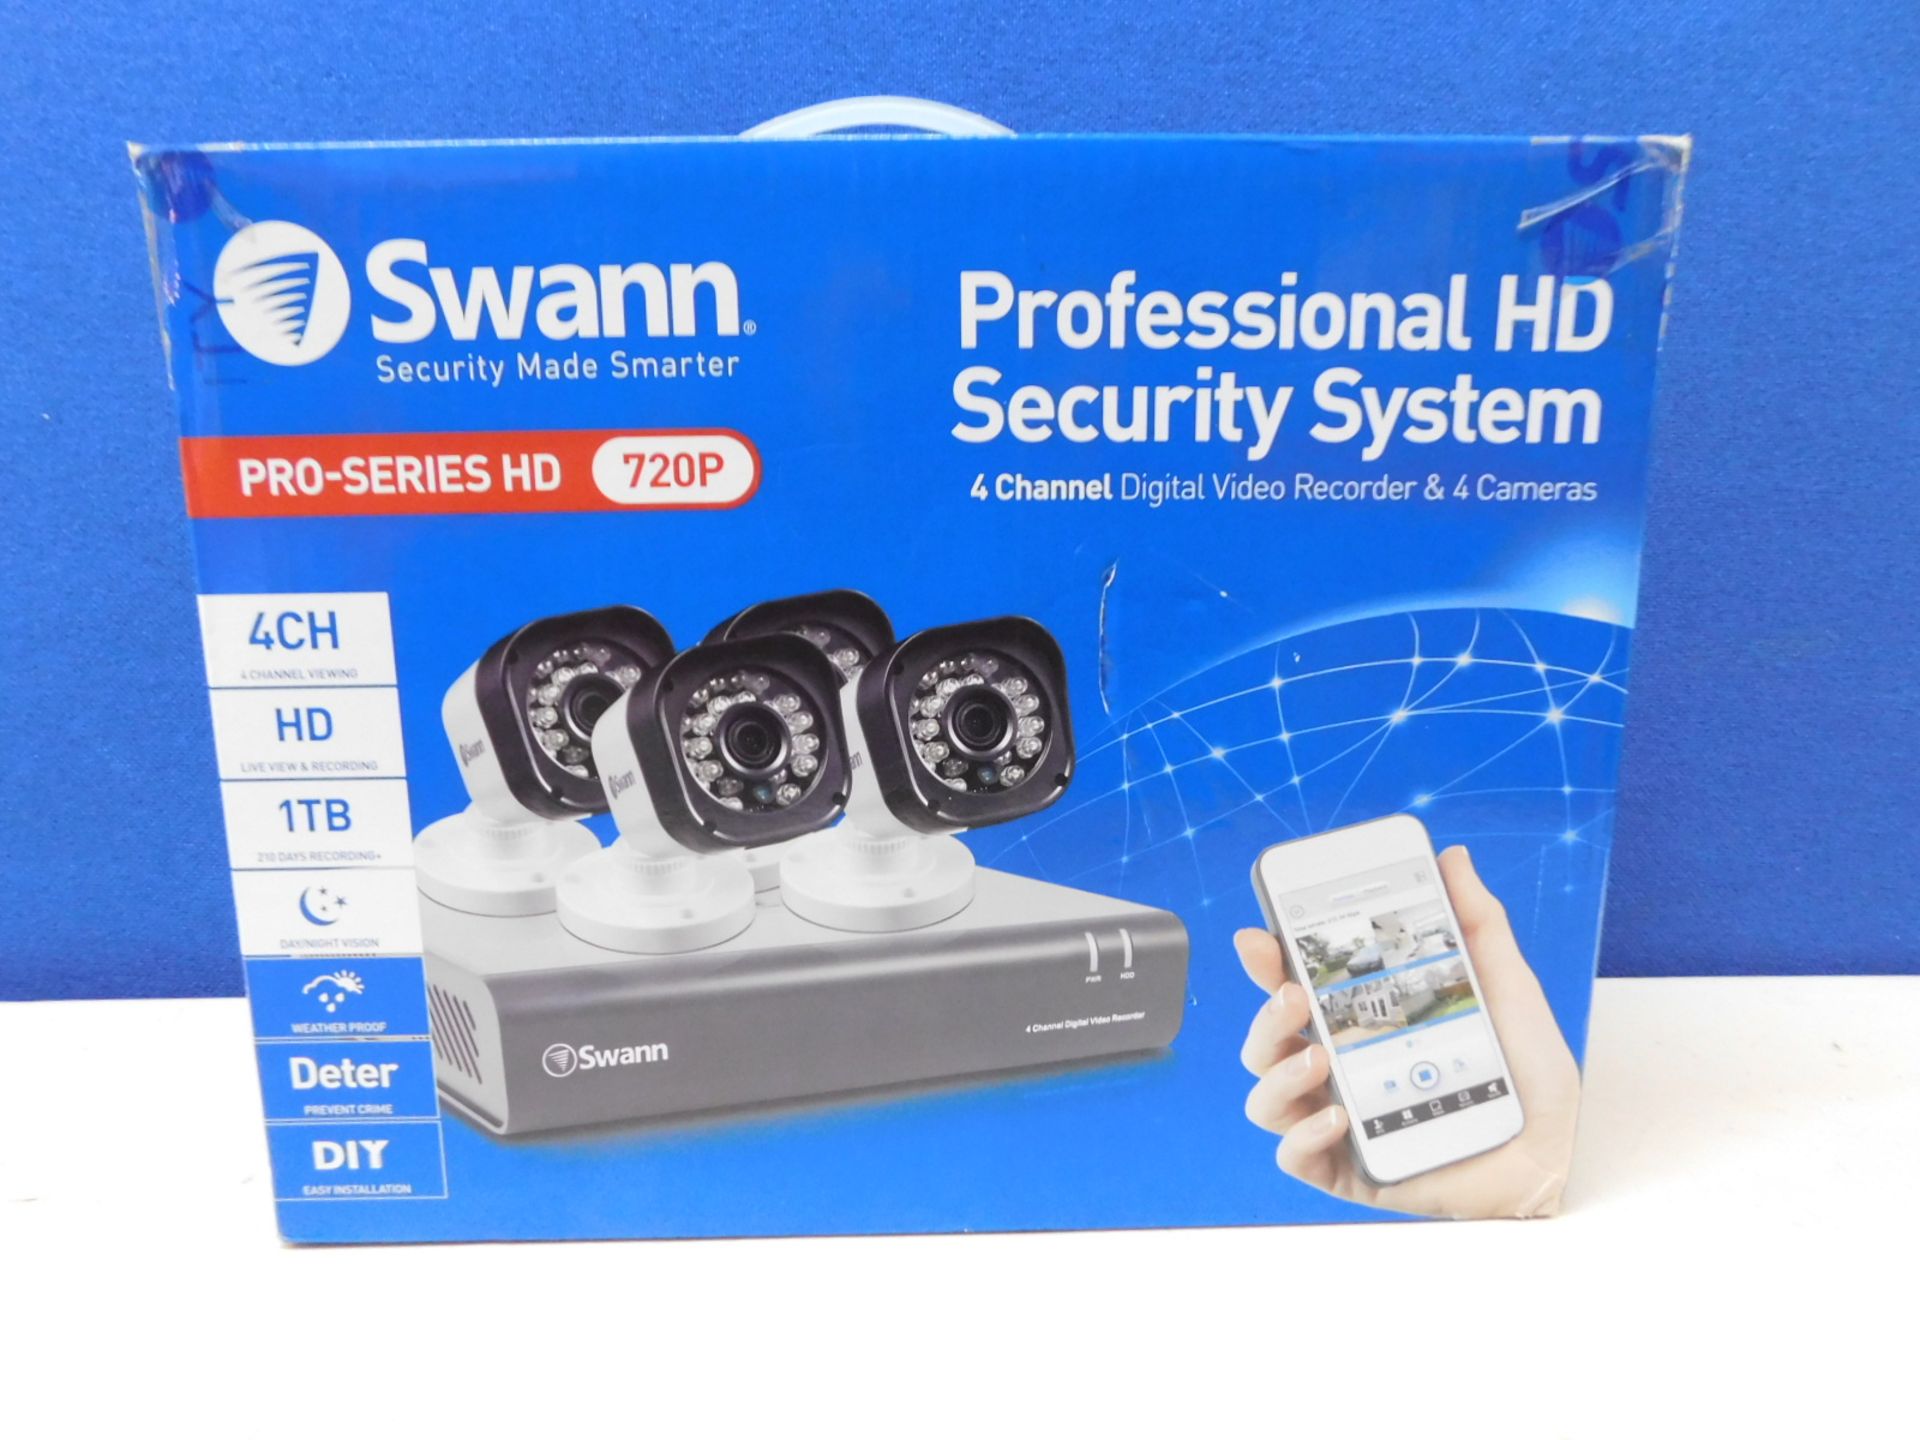 1 BOXED SWANN PRO-SERIES HD SECURITY SYSTEM - DVR4-1580 4CH 720P DIGITAL VIDEO RECORDER & 4 PRO-T835